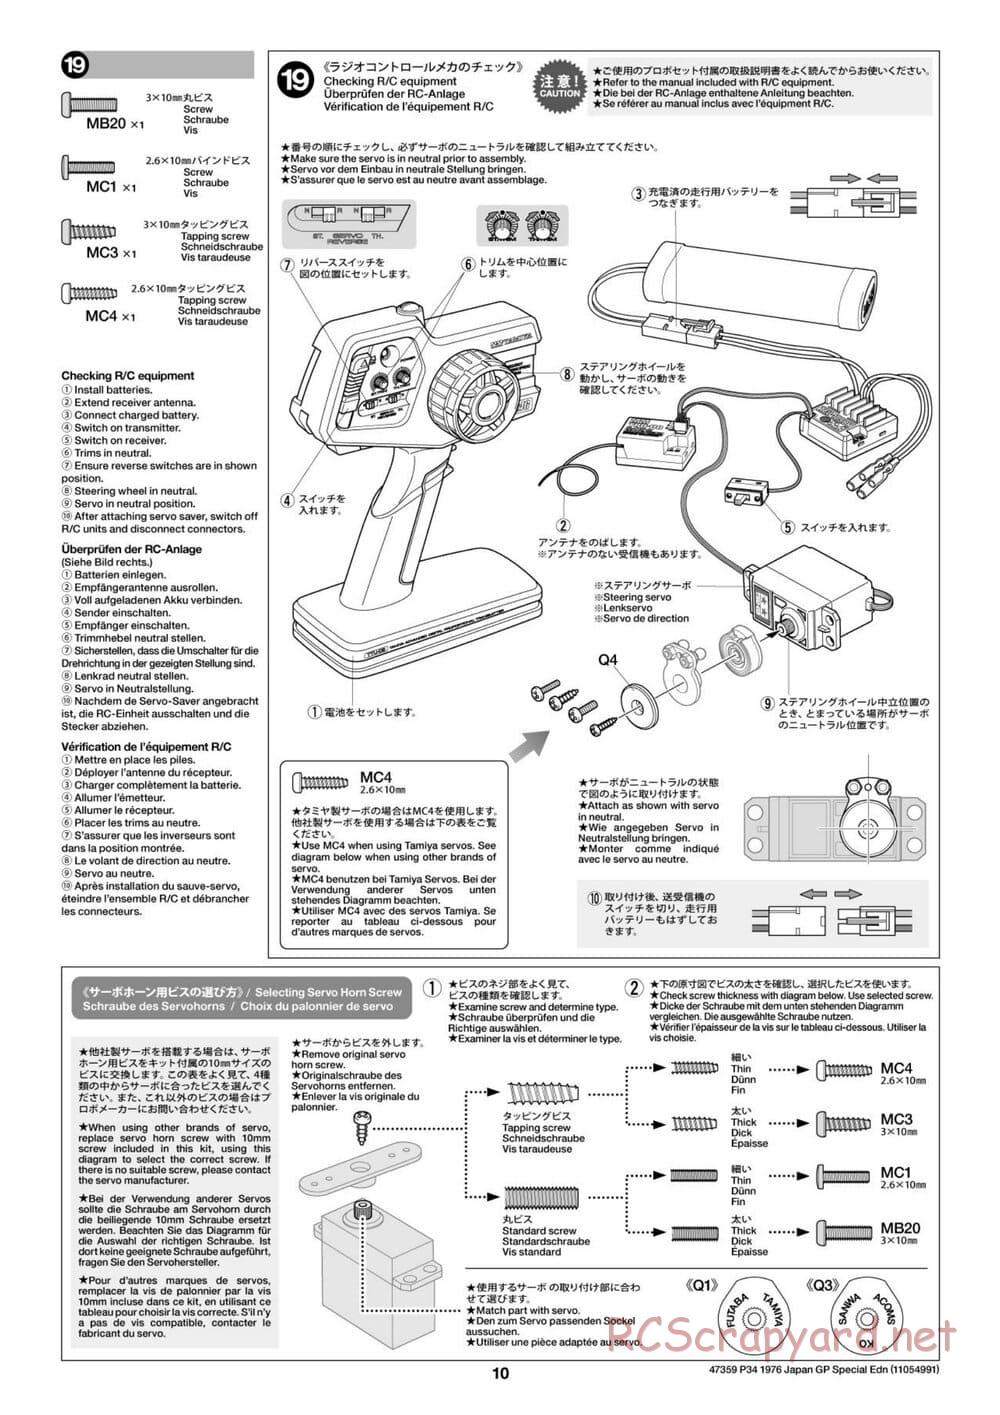 Tamiya - Tyrrell P34 1976 Japan Grand Prix Special - F103-6W Chassis - Manual - Page 10